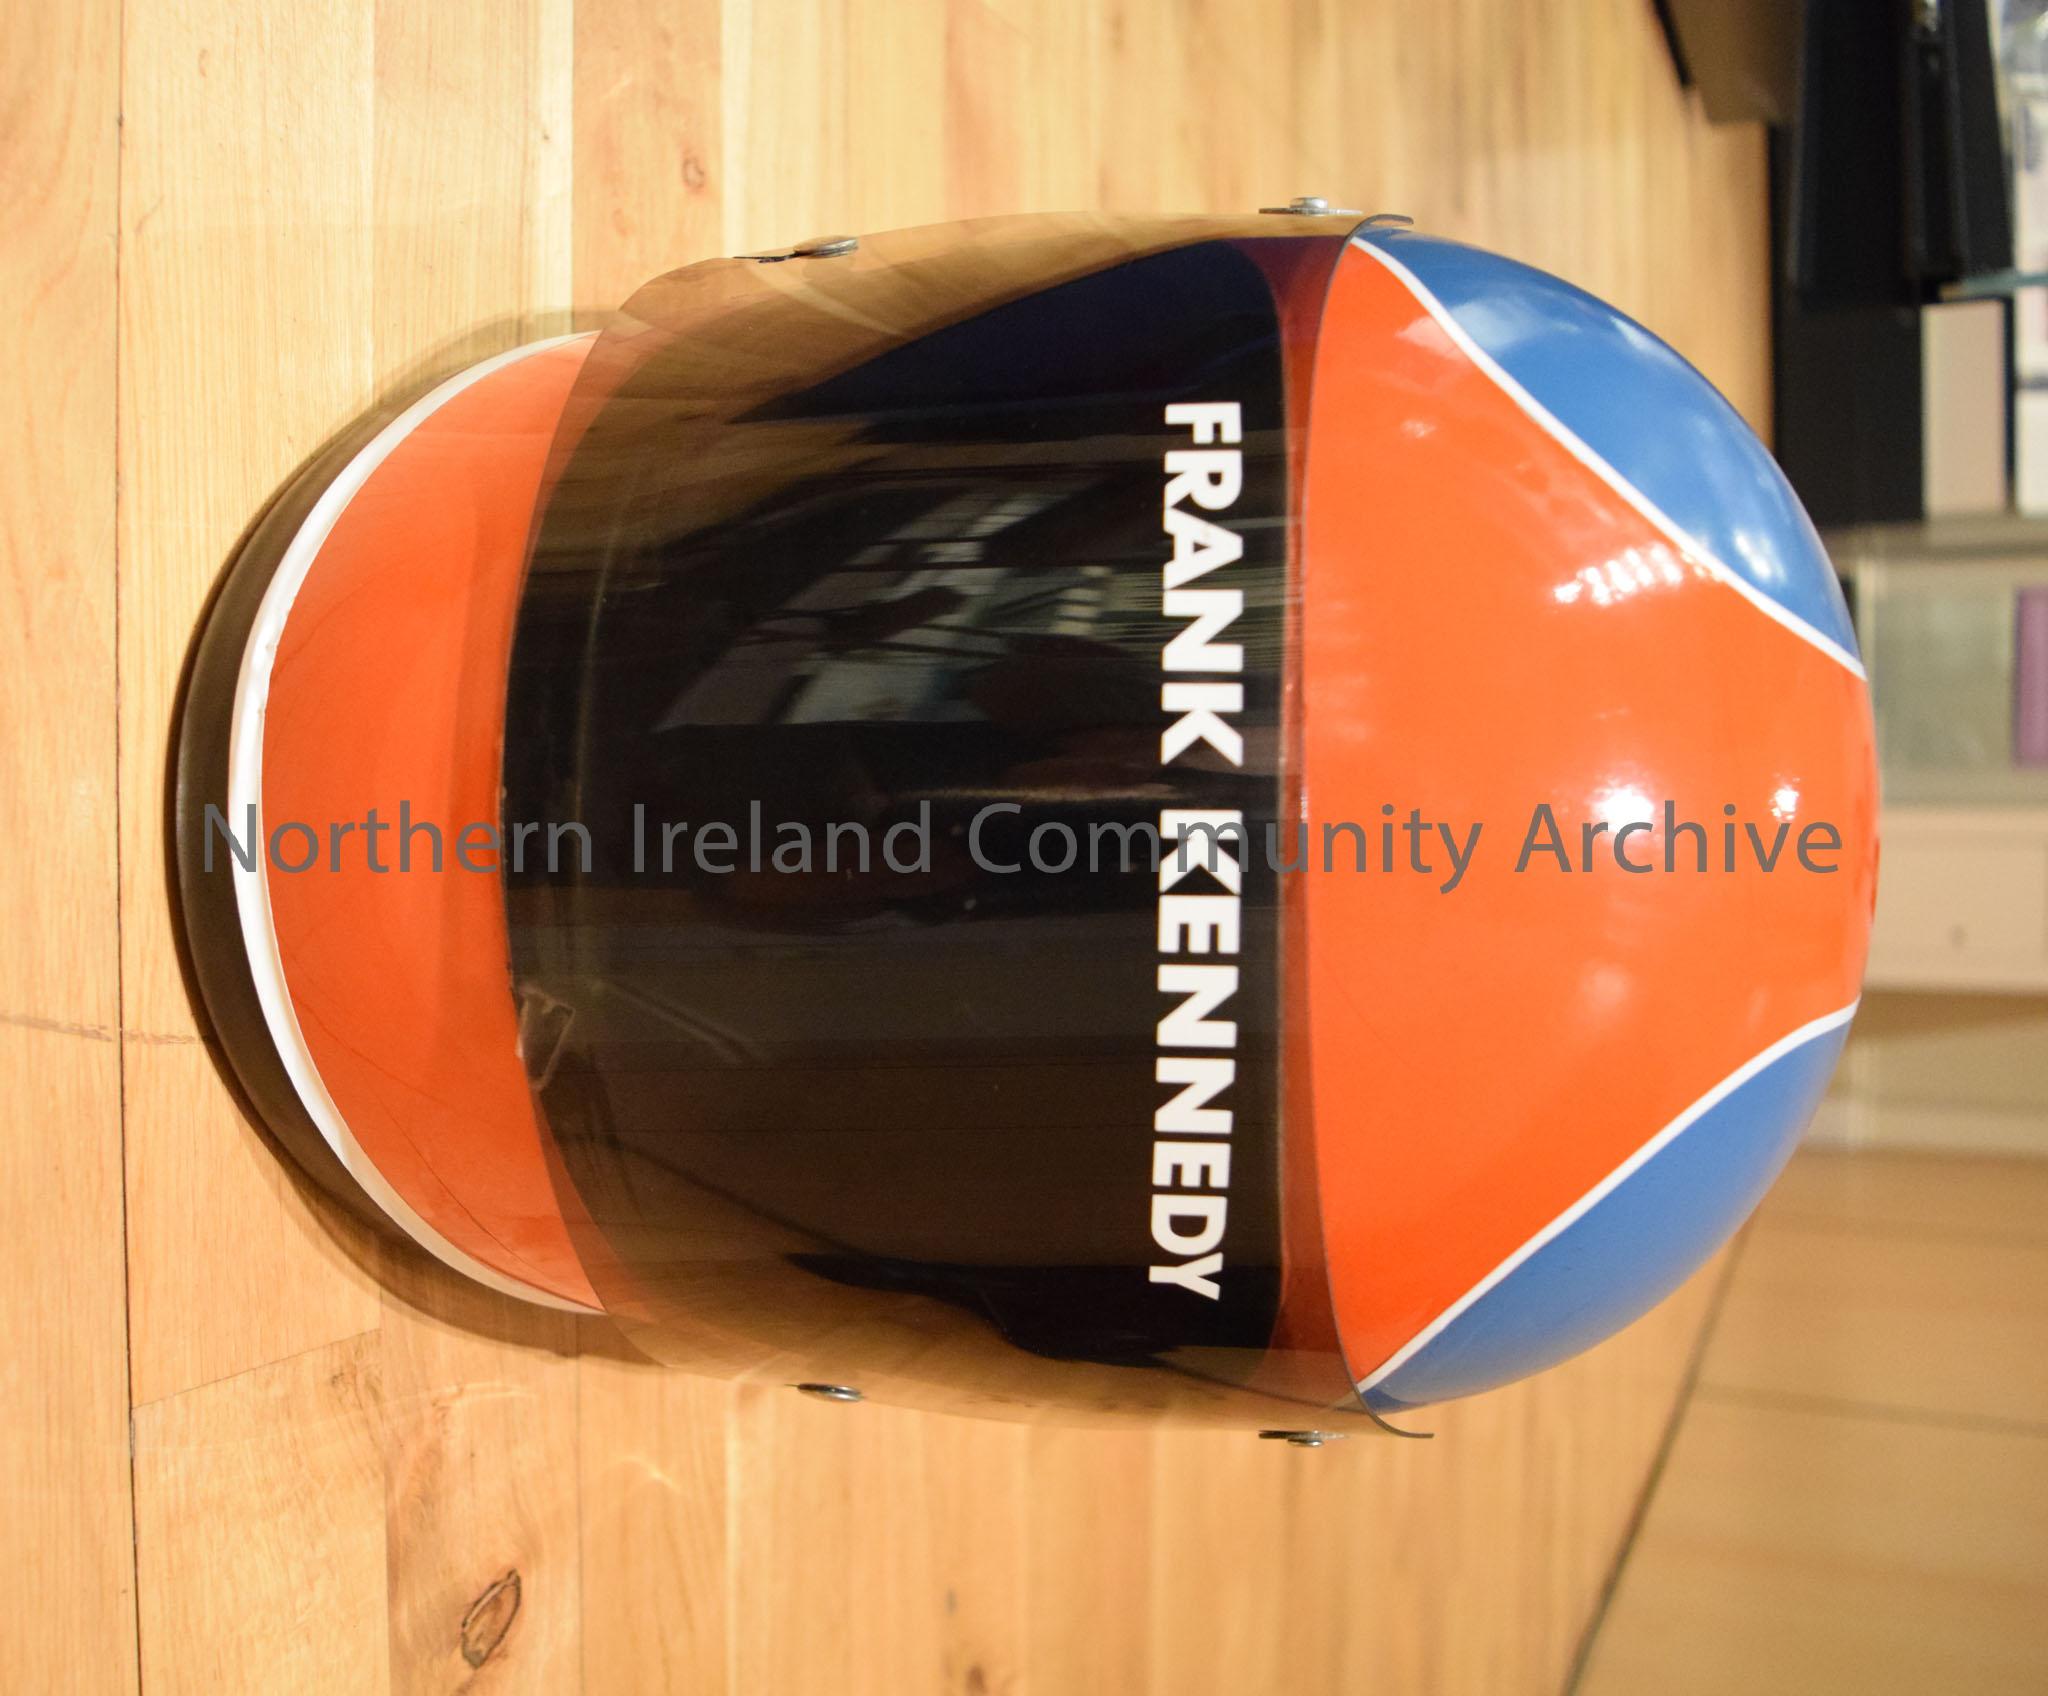 Shoei motorcycle helmet belonging to Frank Kennedy. Blue helmet with red front and red stripe down the middle with a white border- cracked – 2016.109 (2)